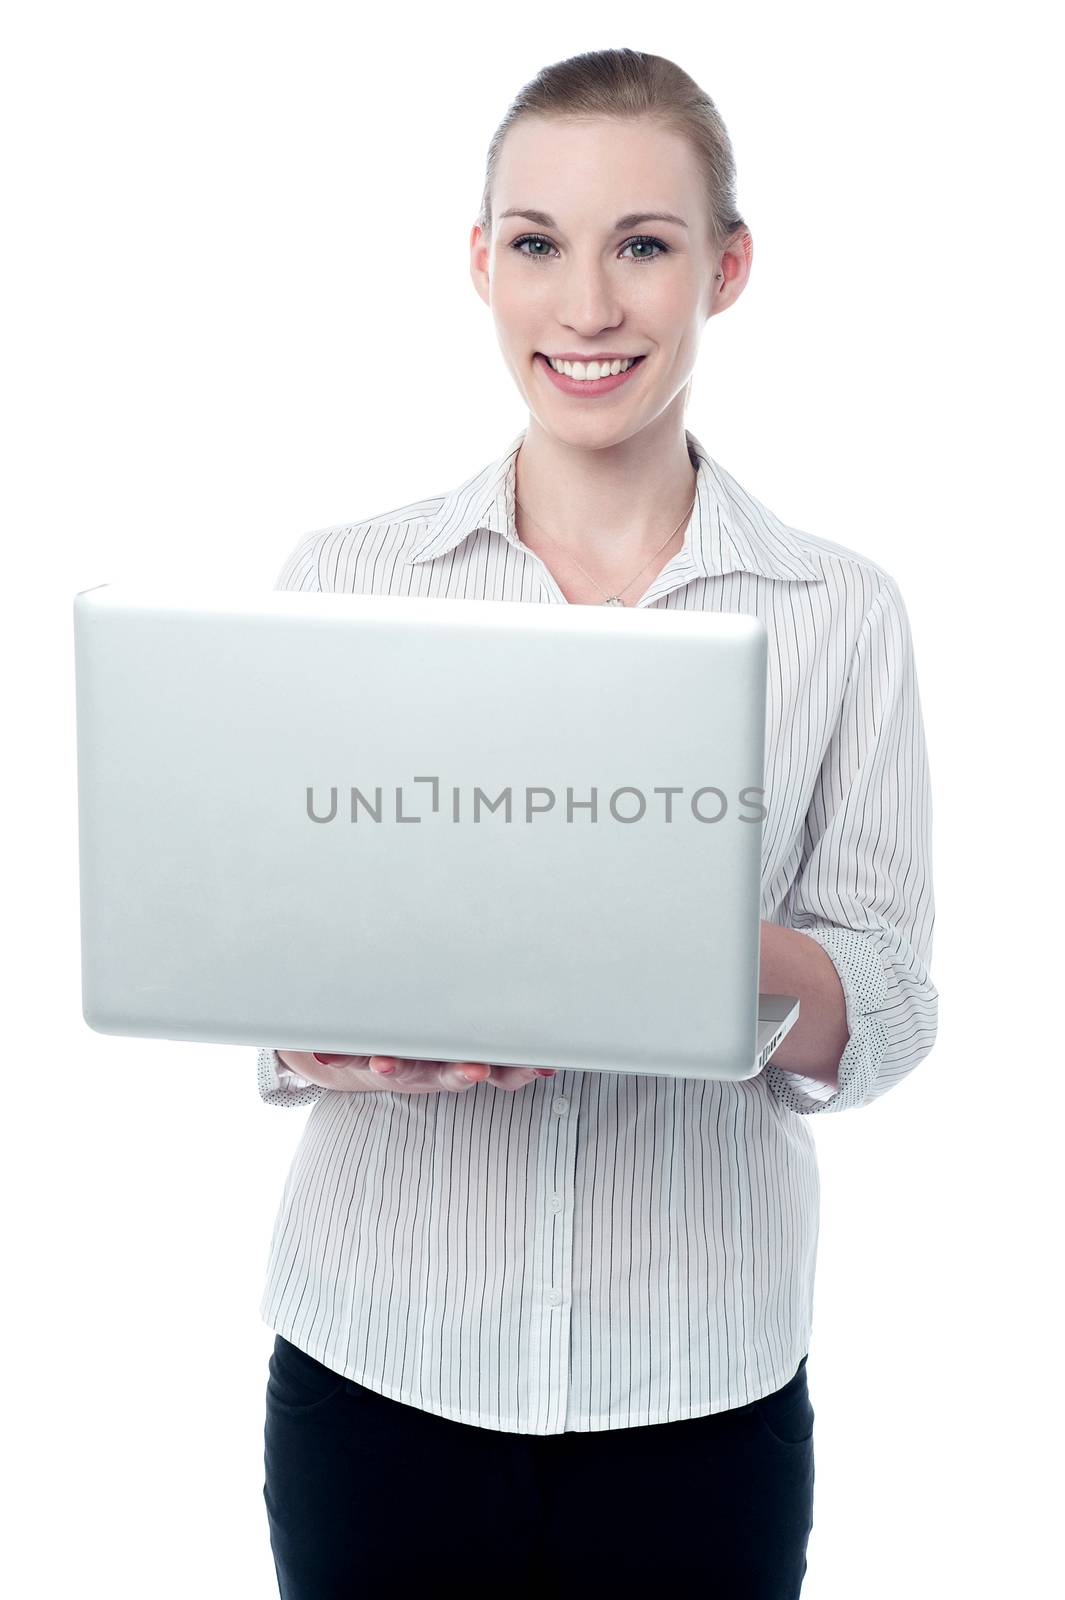 I bought a new laptop.  by stockyimages